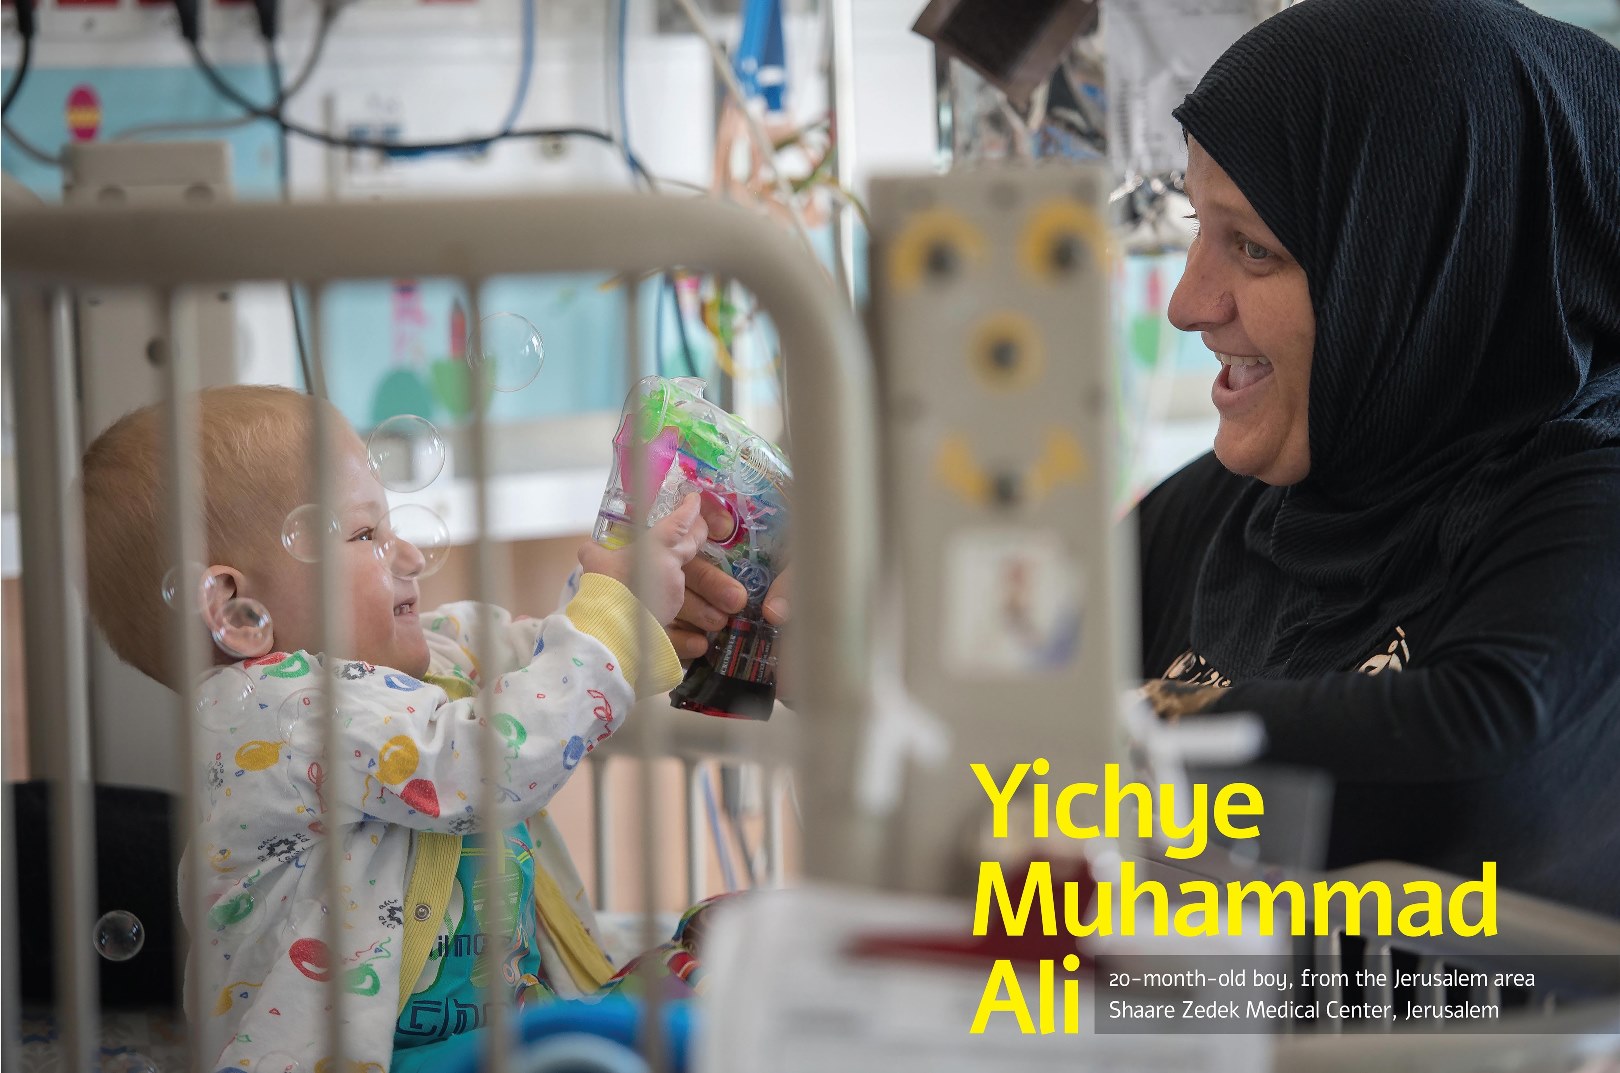 Yichye Muhammad Ali, 20 months, from the Jerusalem area, at Shaare Zedek Medical Center in Jerusalem. Photo by Shahar Azran